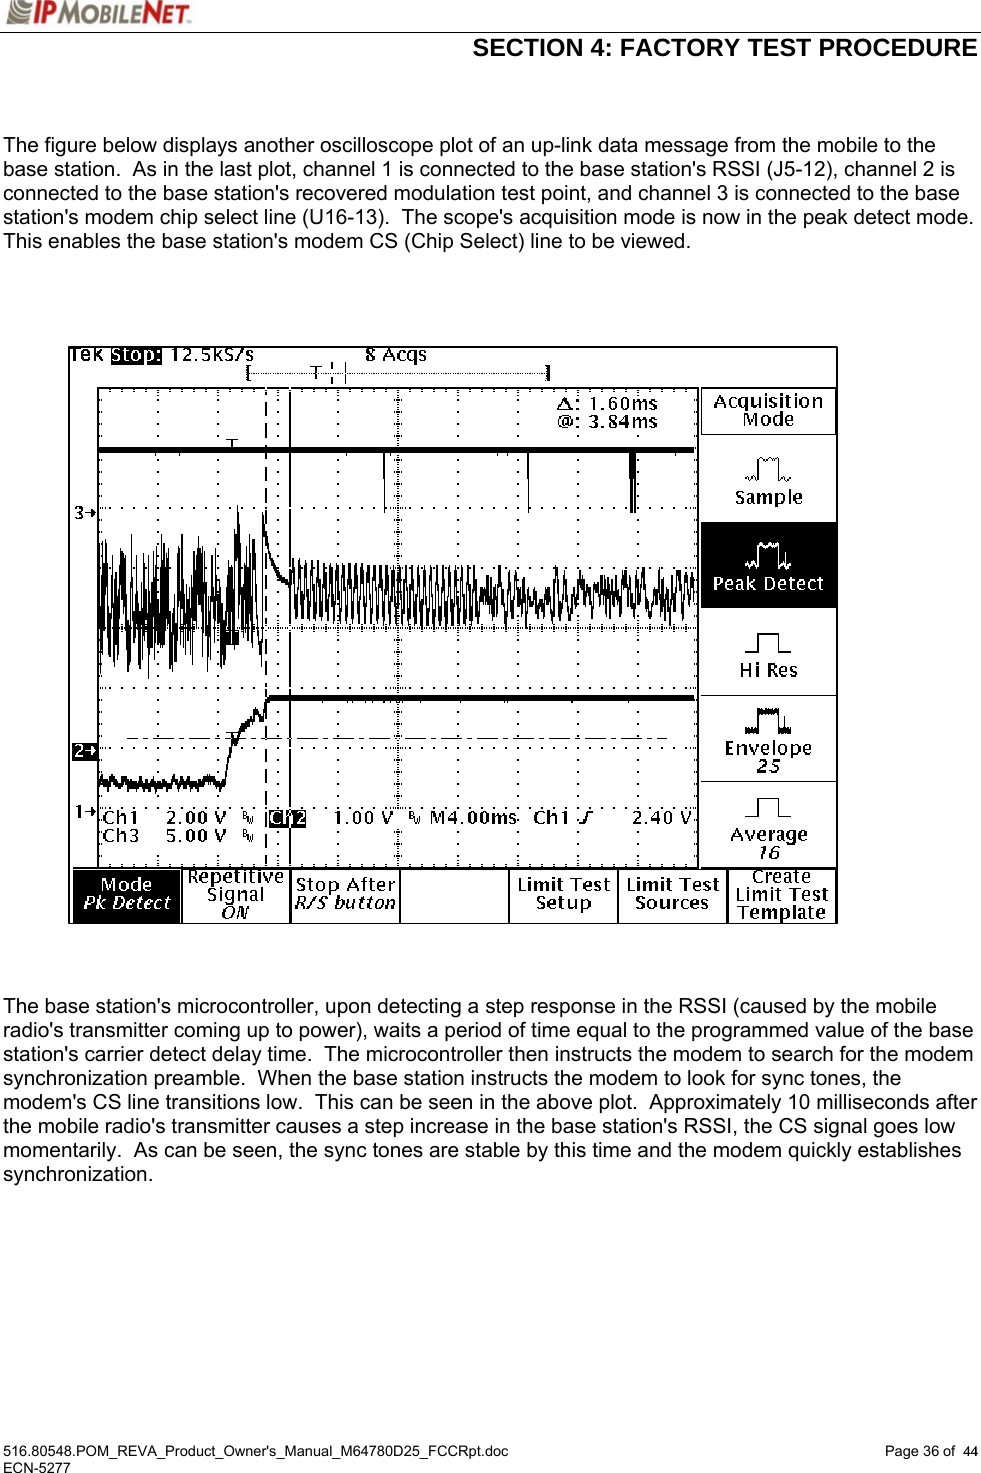  SECTION 4: FACTORY TEST PROCEDURE  516.80548.POM_REVA_Product_Owner&apos;s_Manual_M64780D25_FCCRpt.doc Page 36 of  44 ECN-5277  44  The figure below displays another oscilloscope plot of an up-link data message from the mobile to the base station.  As in the last plot, channel 1 is connected to the base station&apos;s RSSI (J5-12), channel 2 is connected to the base station&apos;s recovered modulation test point, and channel 3 is connected to the base station&apos;s modem chip select line (U16-13).  The scope&apos;s acquisition mode is now in the peak detect mode.  This enables the base station&apos;s modem CS (Chip Select) line to be viewed.       The base station&apos;s microcontroller, upon detecting a step response in the RSSI (caused by the mobile radio&apos;s transmitter coming up to power), waits a period of time equal to the programmed value of the base station&apos;s carrier detect delay time.  The microcontroller then instructs the modem to search for the modem synchronization preamble.  When the base station instructs the modem to look for sync tones, the modem&apos;s CS line transitions low.  This can be seen in the above plot.  Approximately 10 milliseconds after the mobile radio&apos;s transmitter causes a step increase in the base station&apos;s RSSI, the CS signal goes low momentarily.  As can be seen, the sync tones are stable by this time and the modem quickly establishes synchronization.   